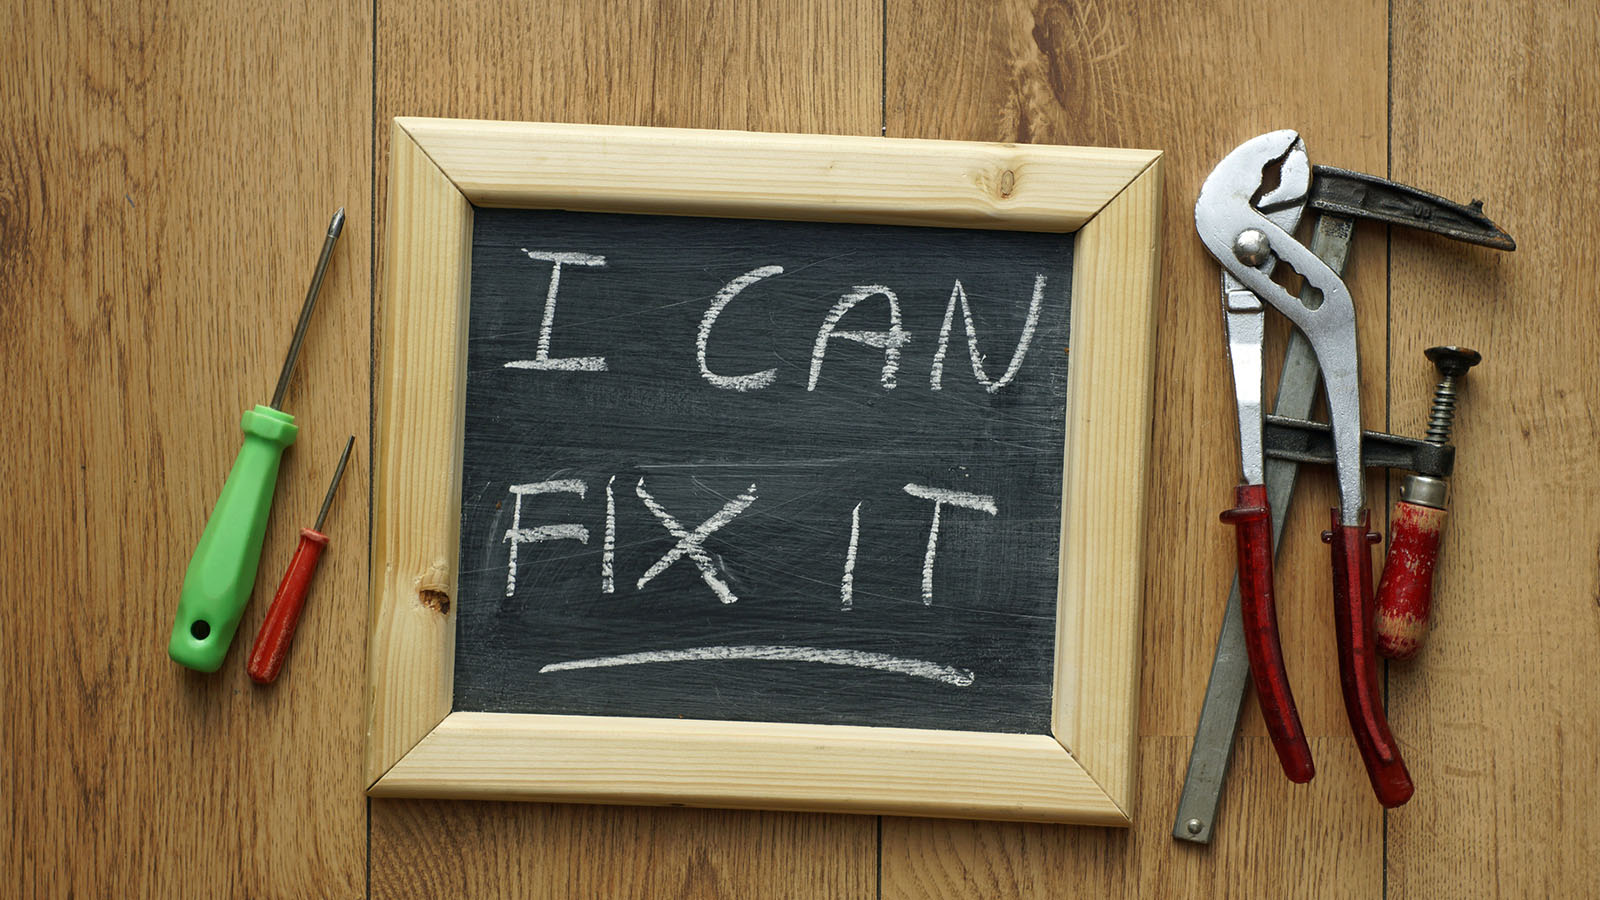 I can Fix. I can Fix it. School do it yourself. Try it yourself. Can you fix my